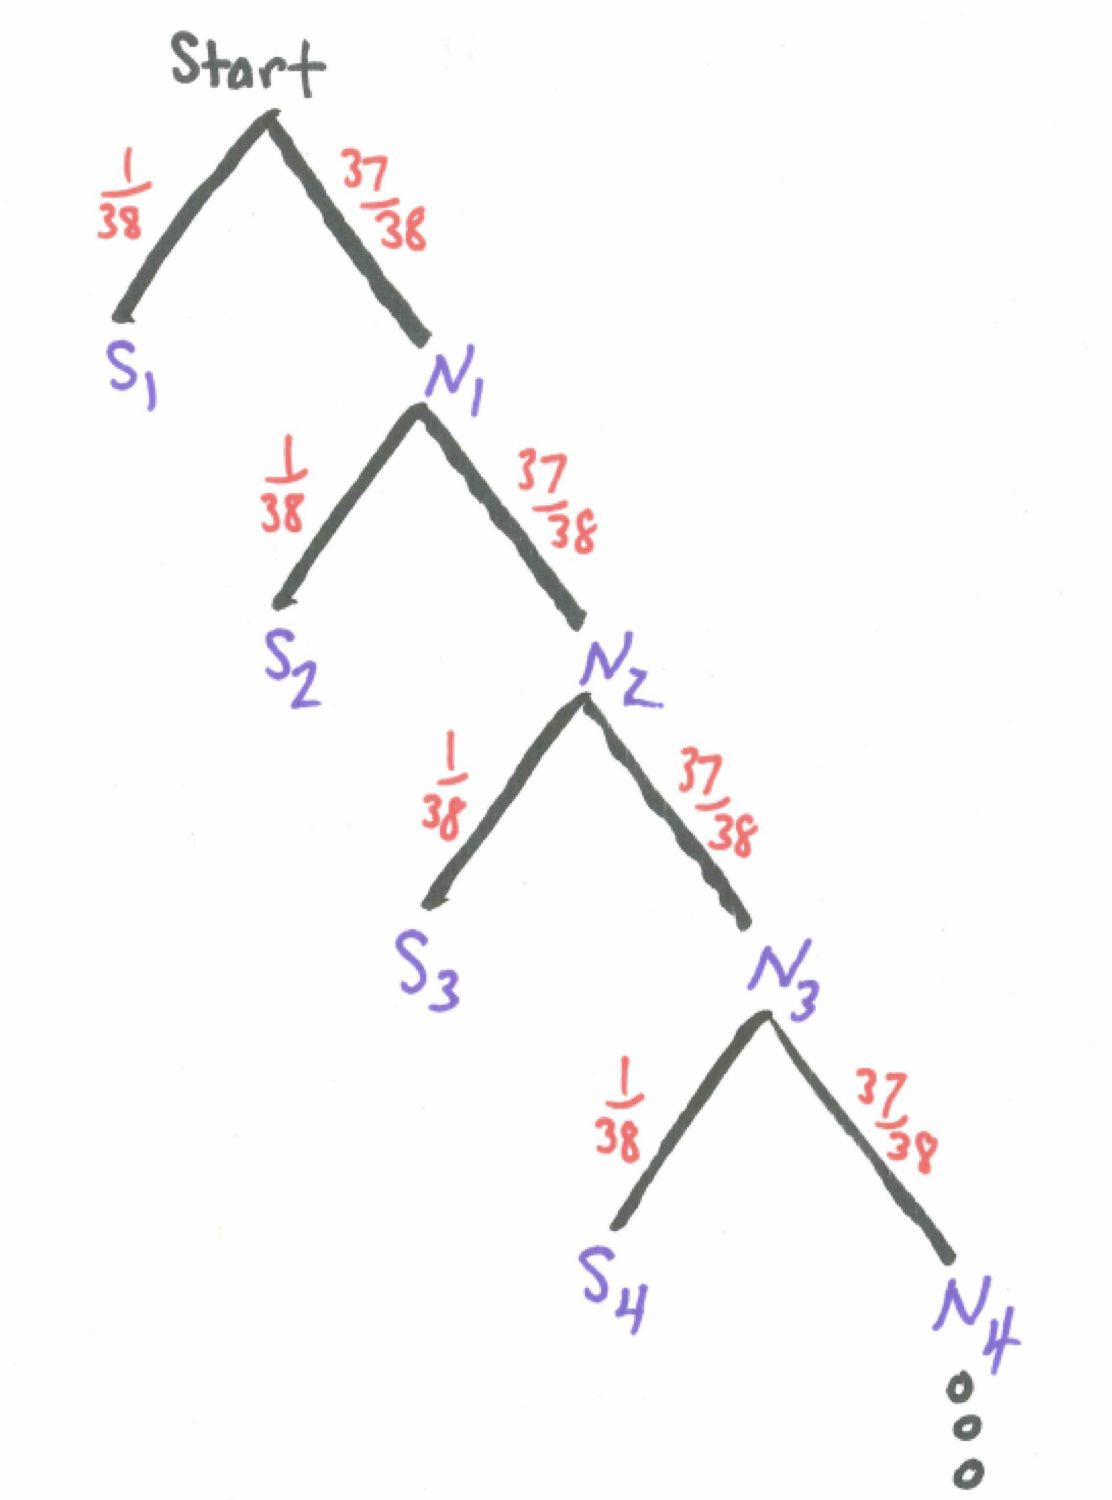 Tree Diagram - Waiting for Lucky Number 7